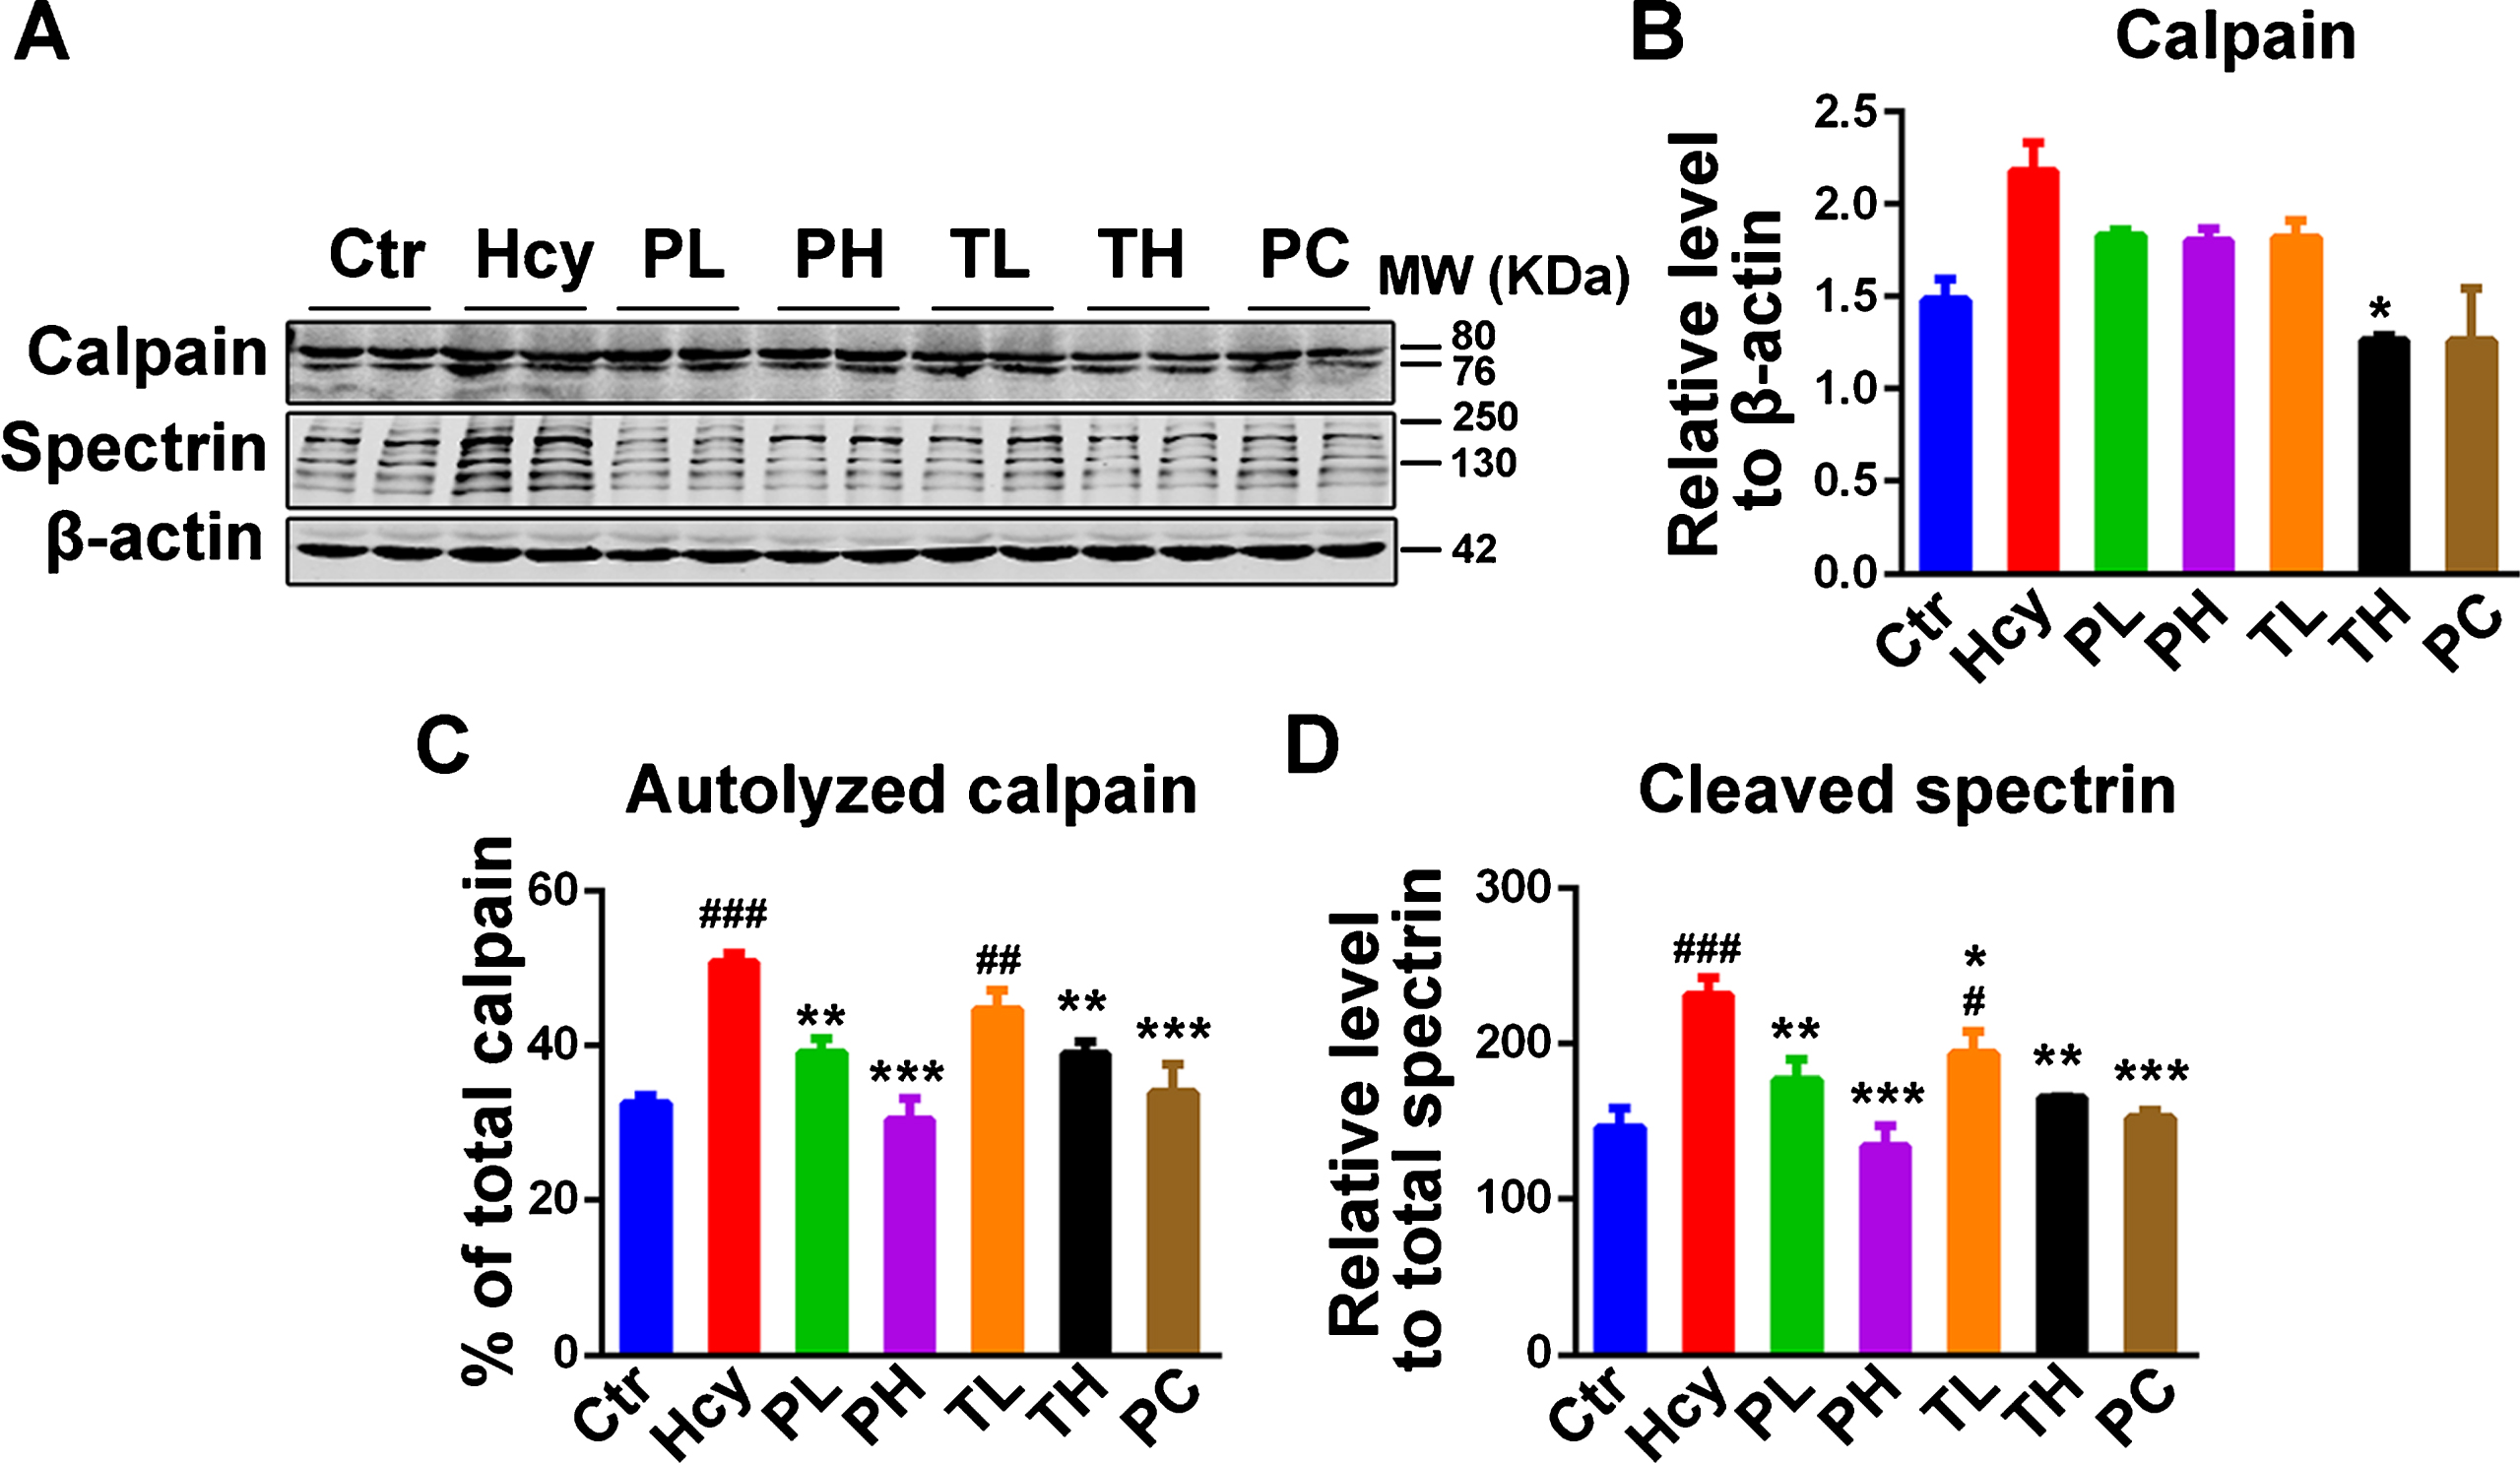 MO treatment attenuated the increase in calpain activity due to HHcy. A) Western blotting of total calpain and its cleaved substrate spectrin. The increased cleaved spectrin as measure of calpain activity was reduced by MO treatments. B-D) Quantification of western blots, calpain was normalized to β-actin and cleaved spectrin to total spectrin. The data were expressed as mean±SD (n = 6). #p < 0.05, # #p < 0.01, # # #p < 0.001 versus control; *p < 0.05, **p < 0.01, ***p < 0.001 versus Hcy.